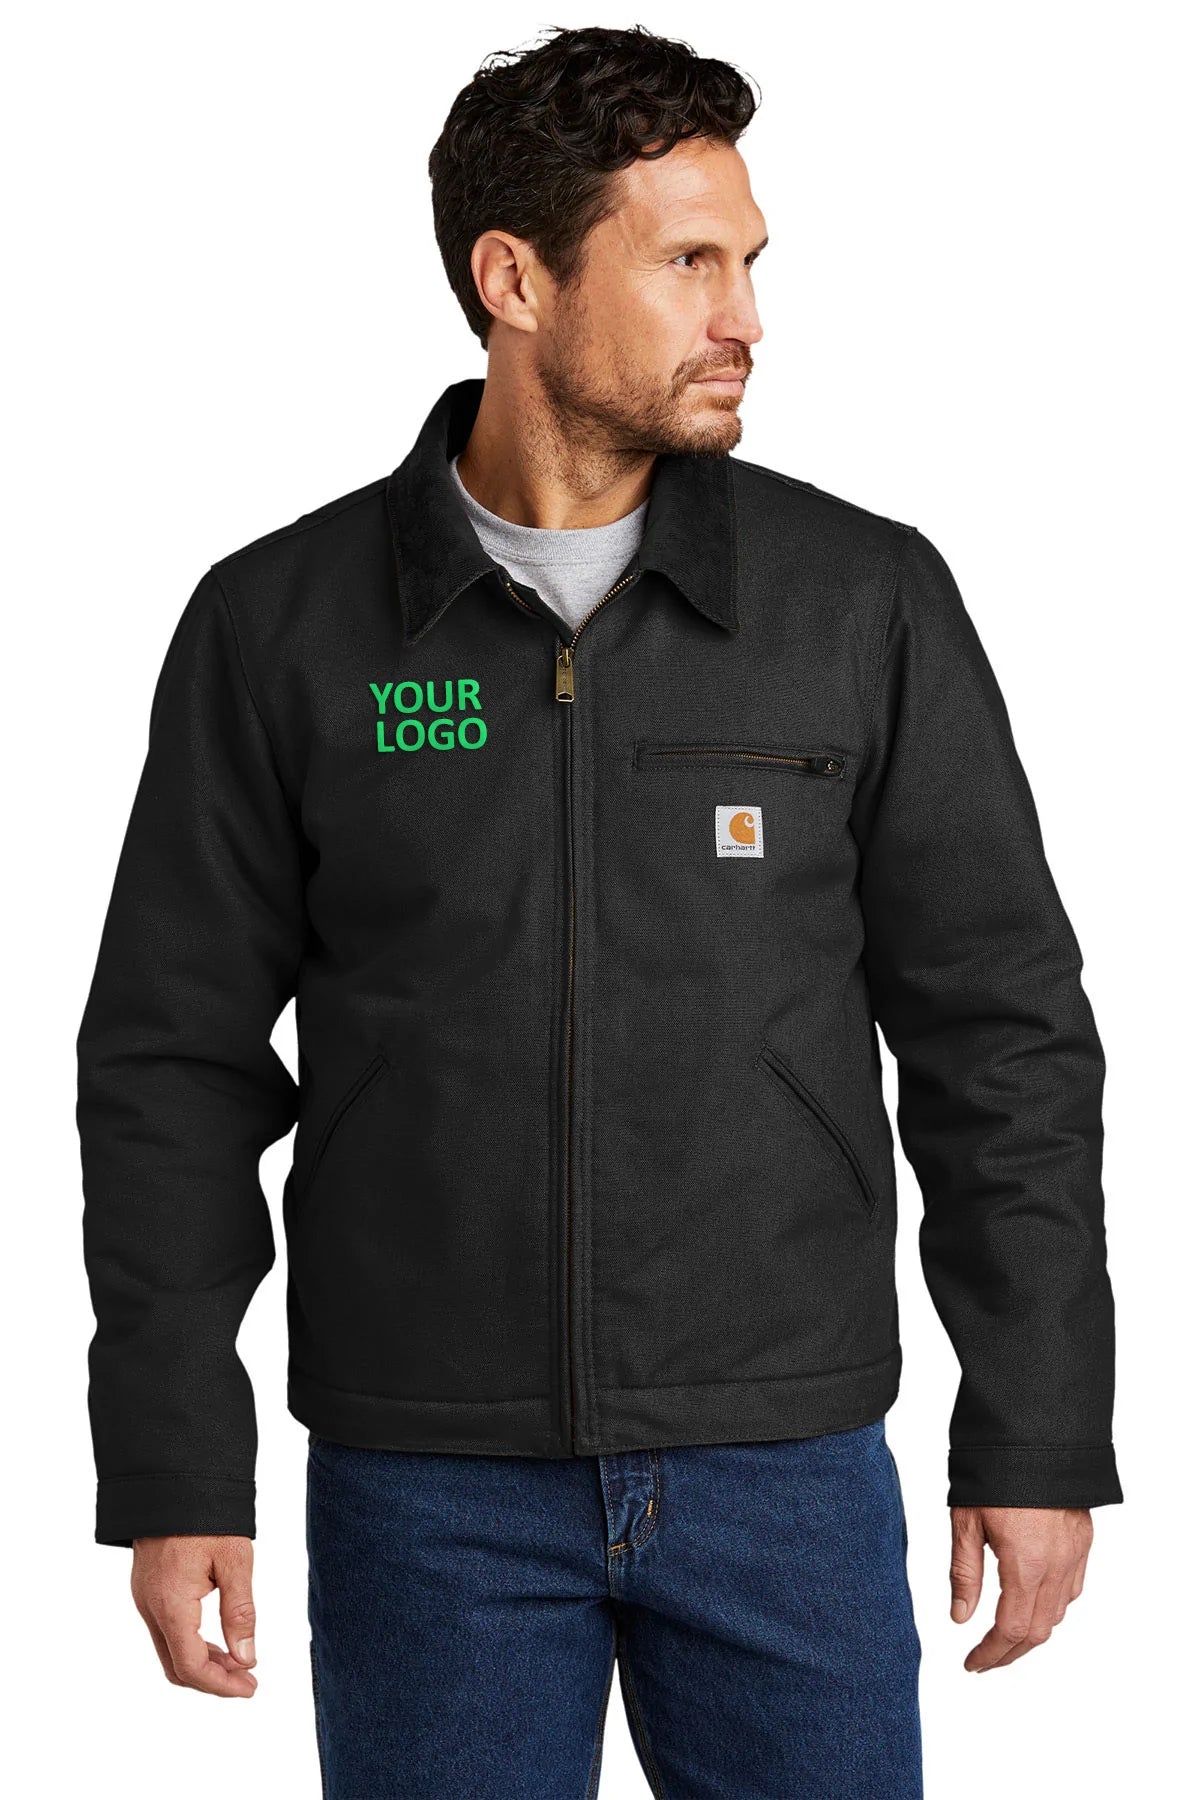 New Mens Carhartt Duck Detroit Jacket Work Coat CT103828 - Pick Size and  Color